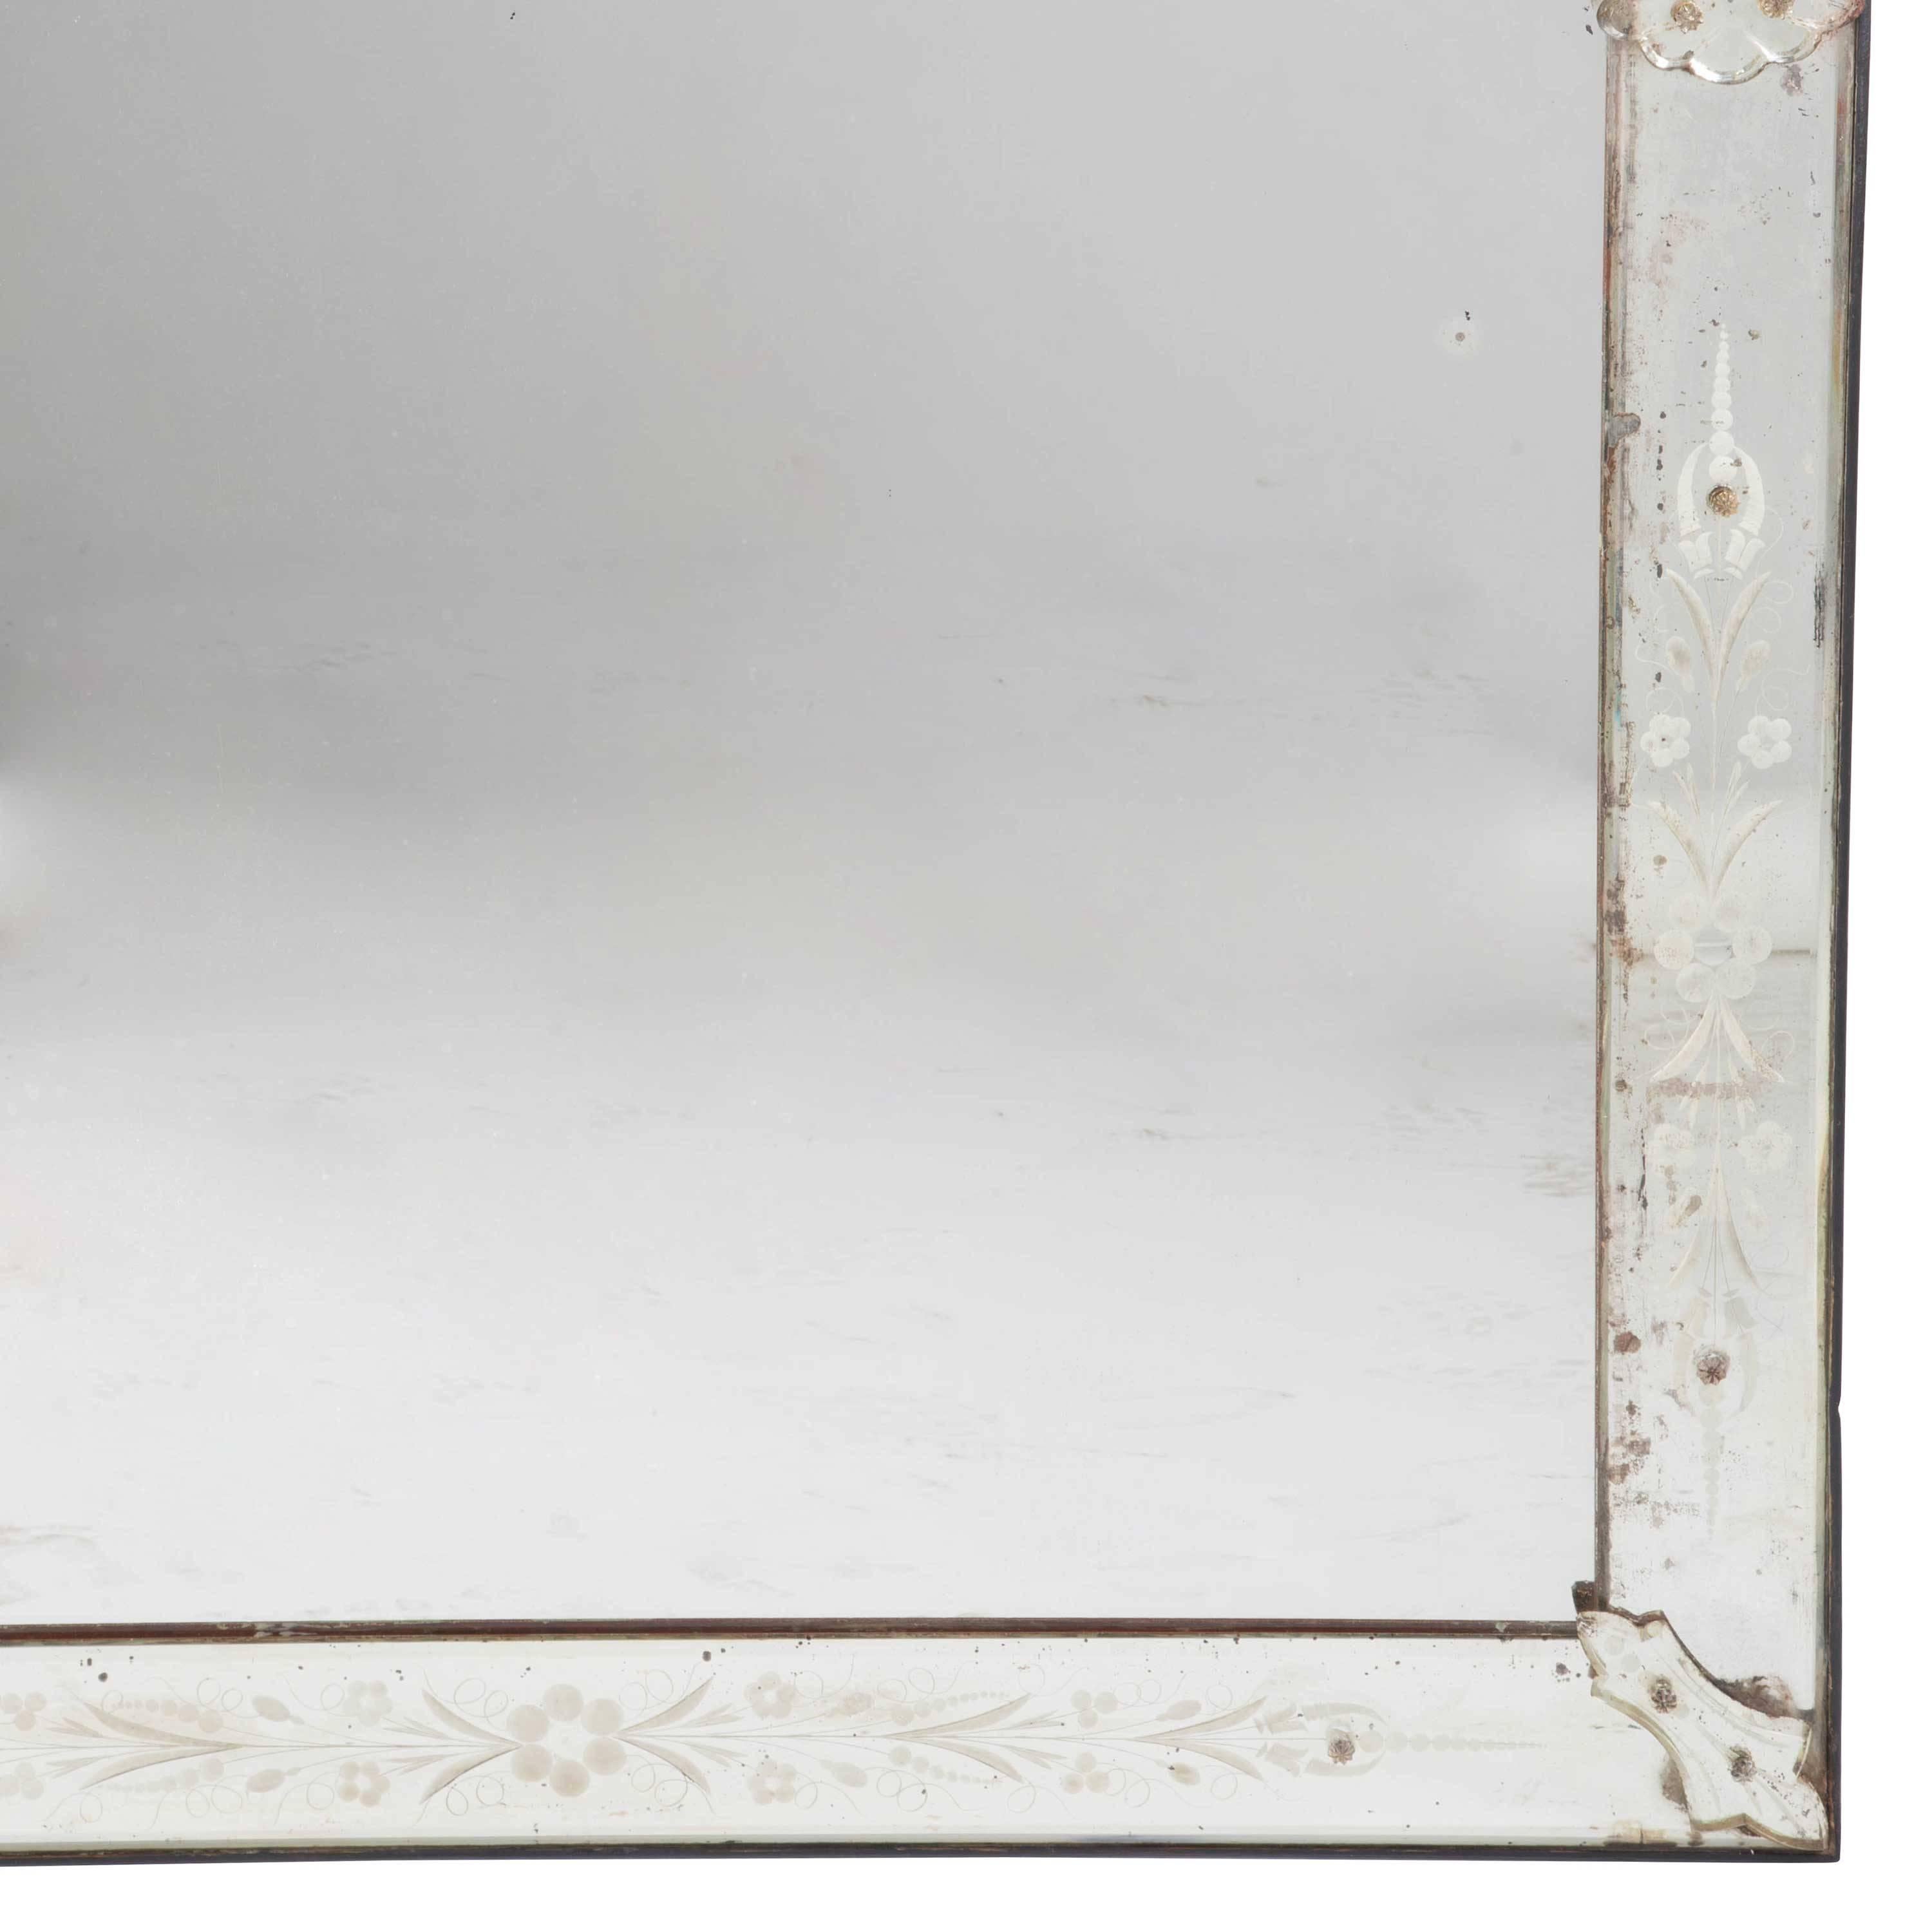 Large late 19th century Venetian mirror with good foxy mirror plate.